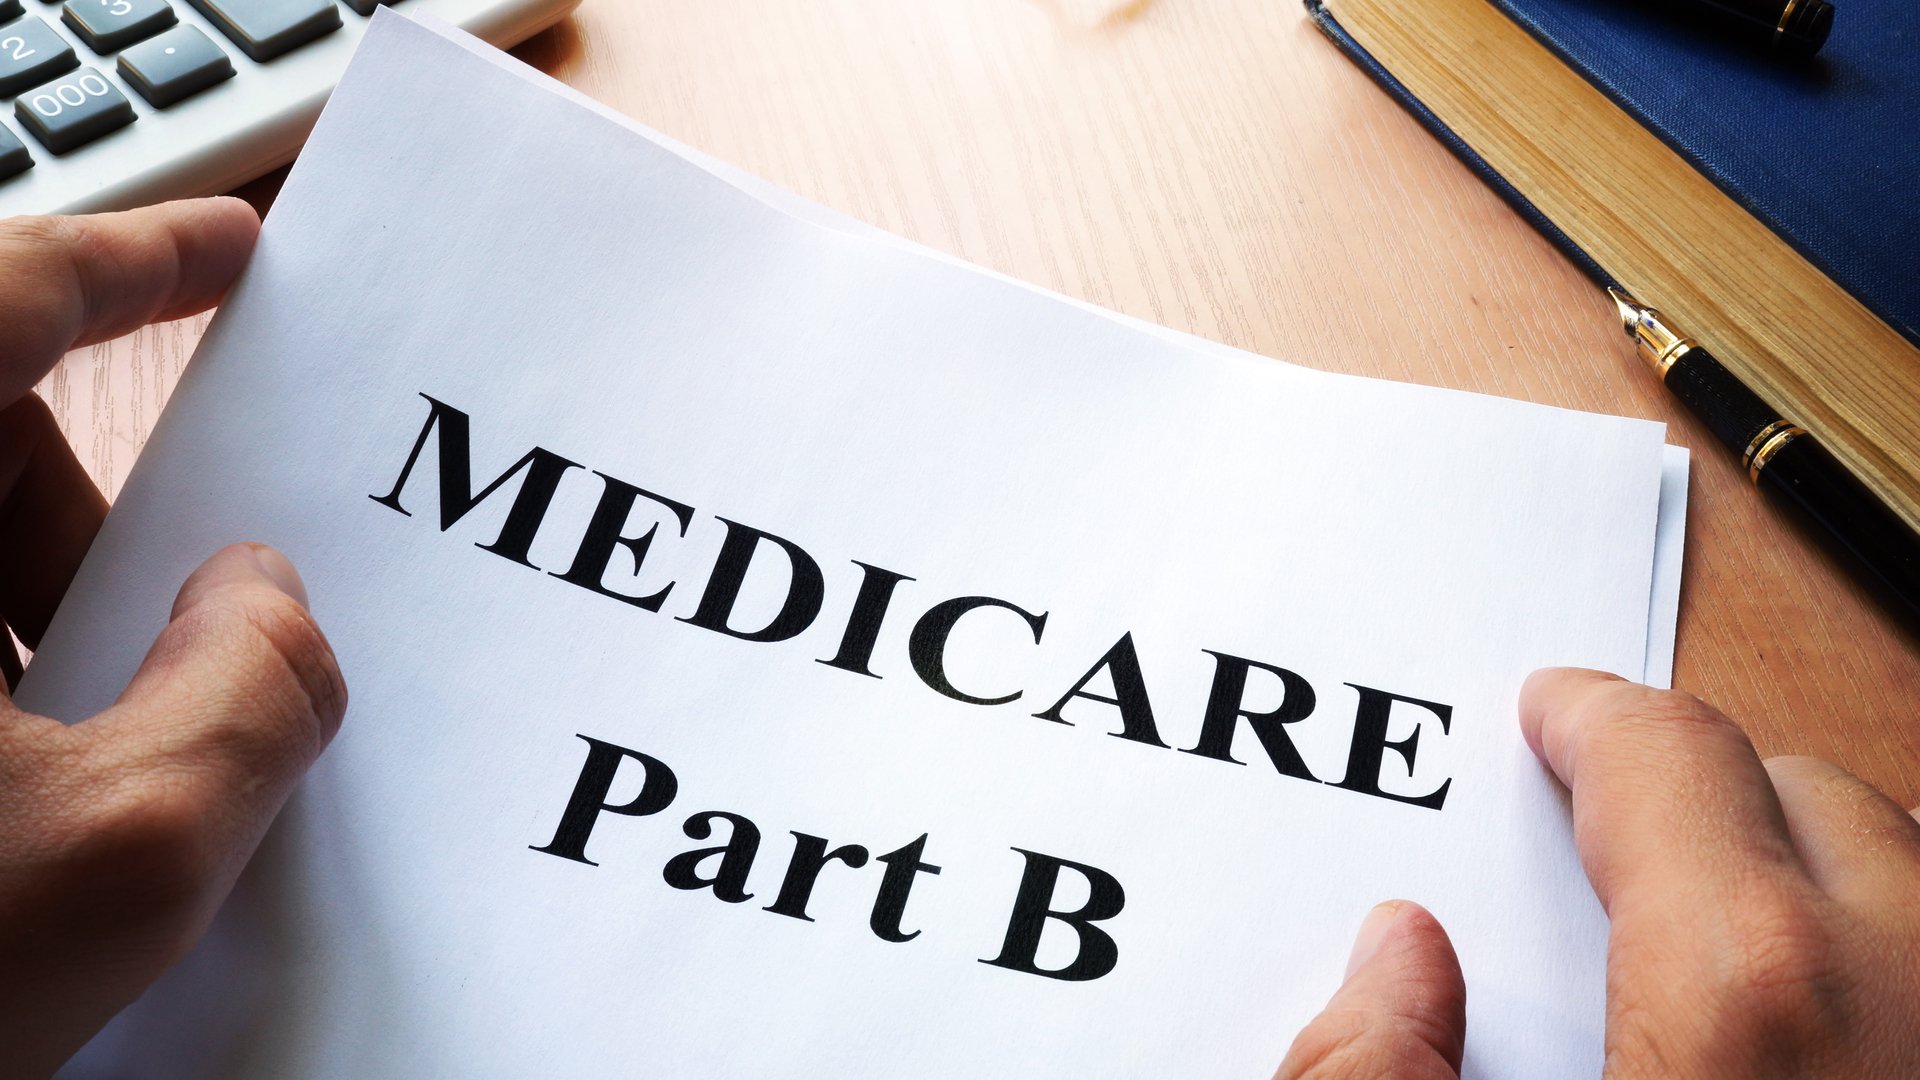 WHAT IS MEDICARE PART B